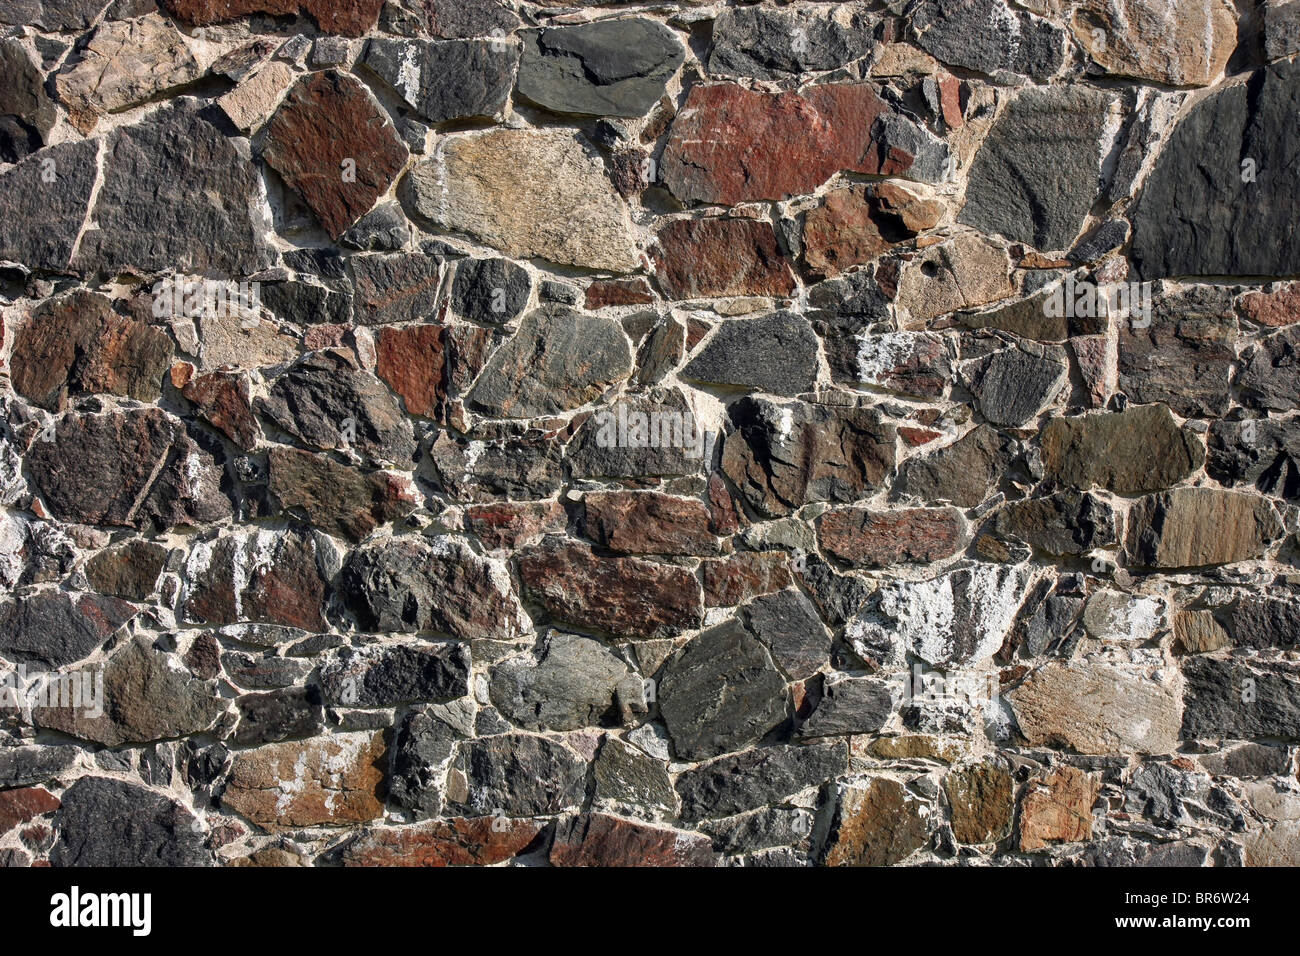 Textured background image showing an old stone wall pattern Stock Photo